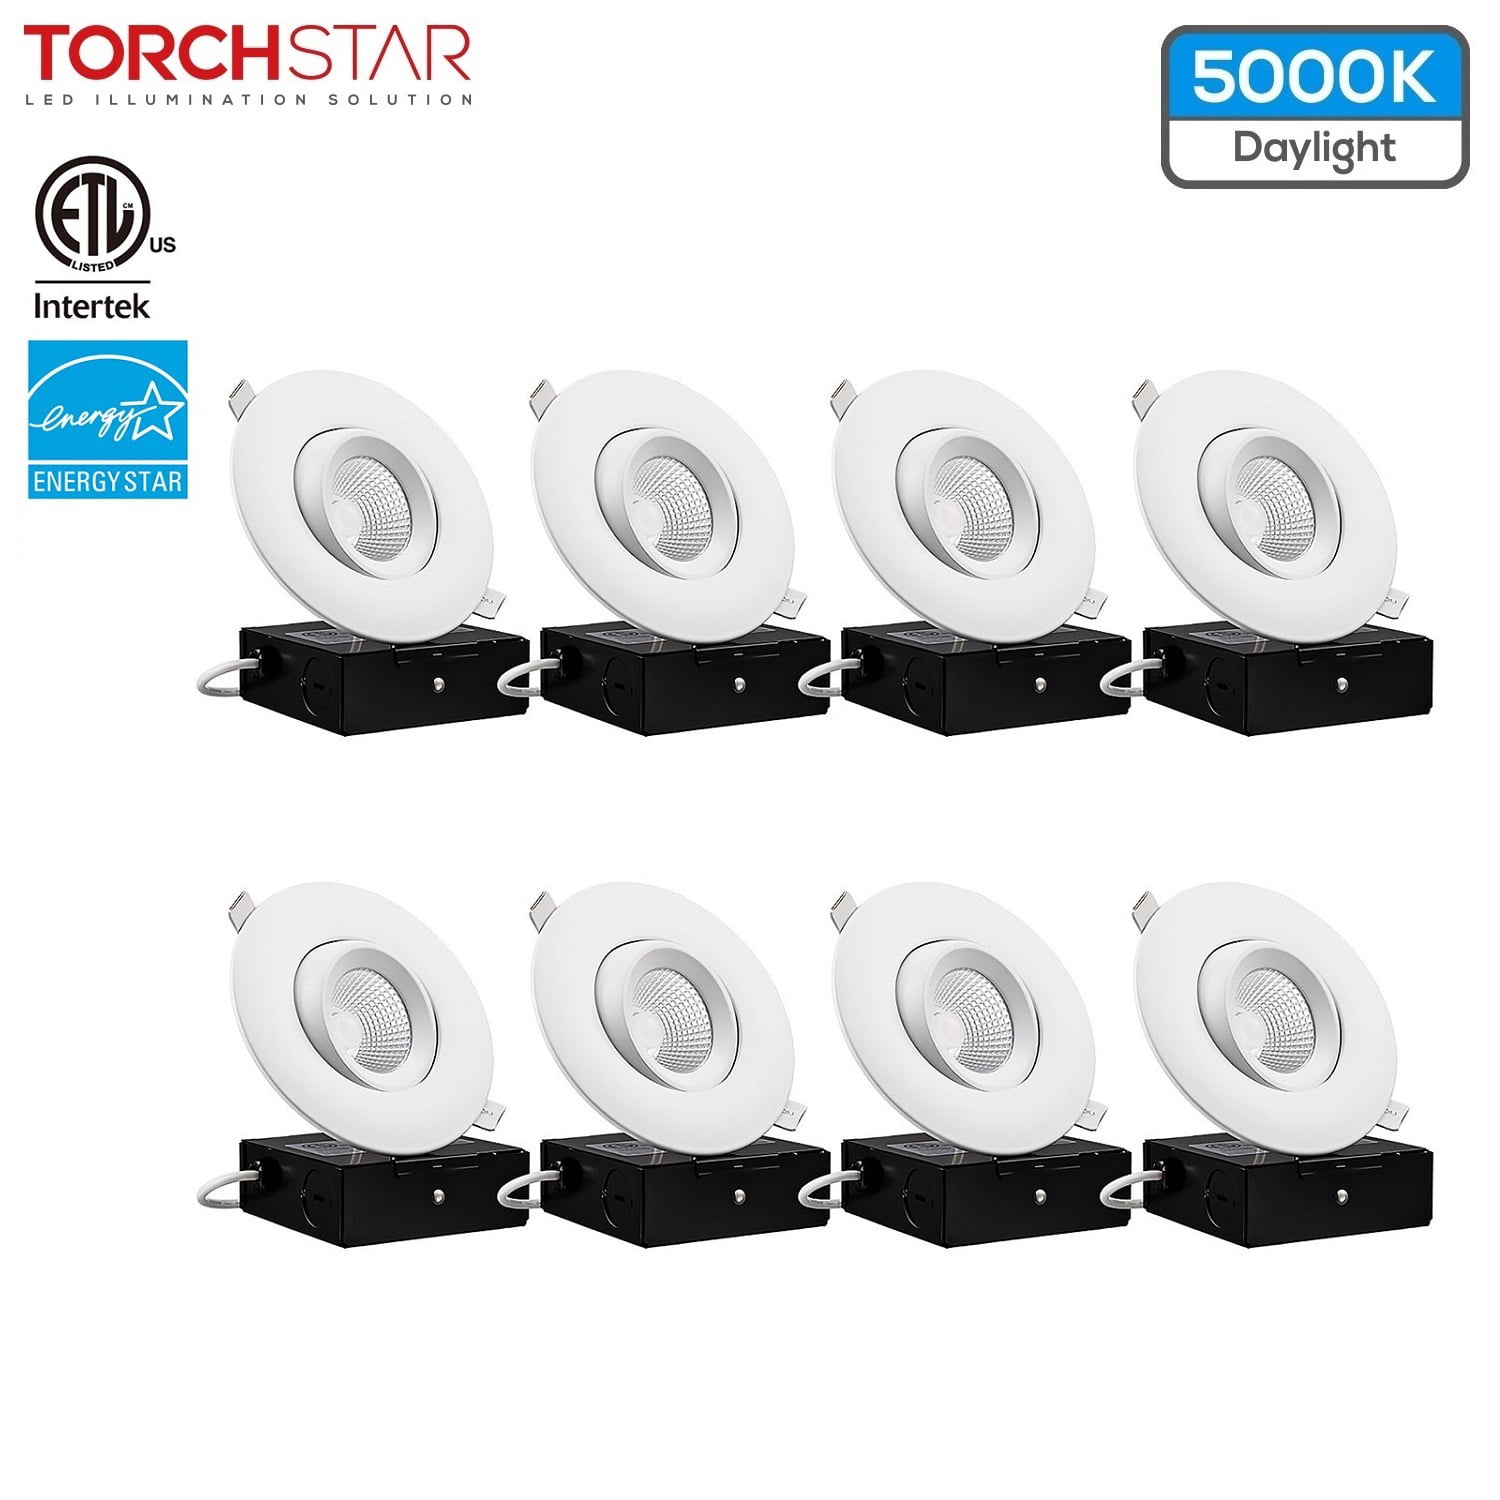 High CRI 90 5000K TORCHSTAR 12 PACK 10W 4 inch Dimmable Recessed LED Downlight 